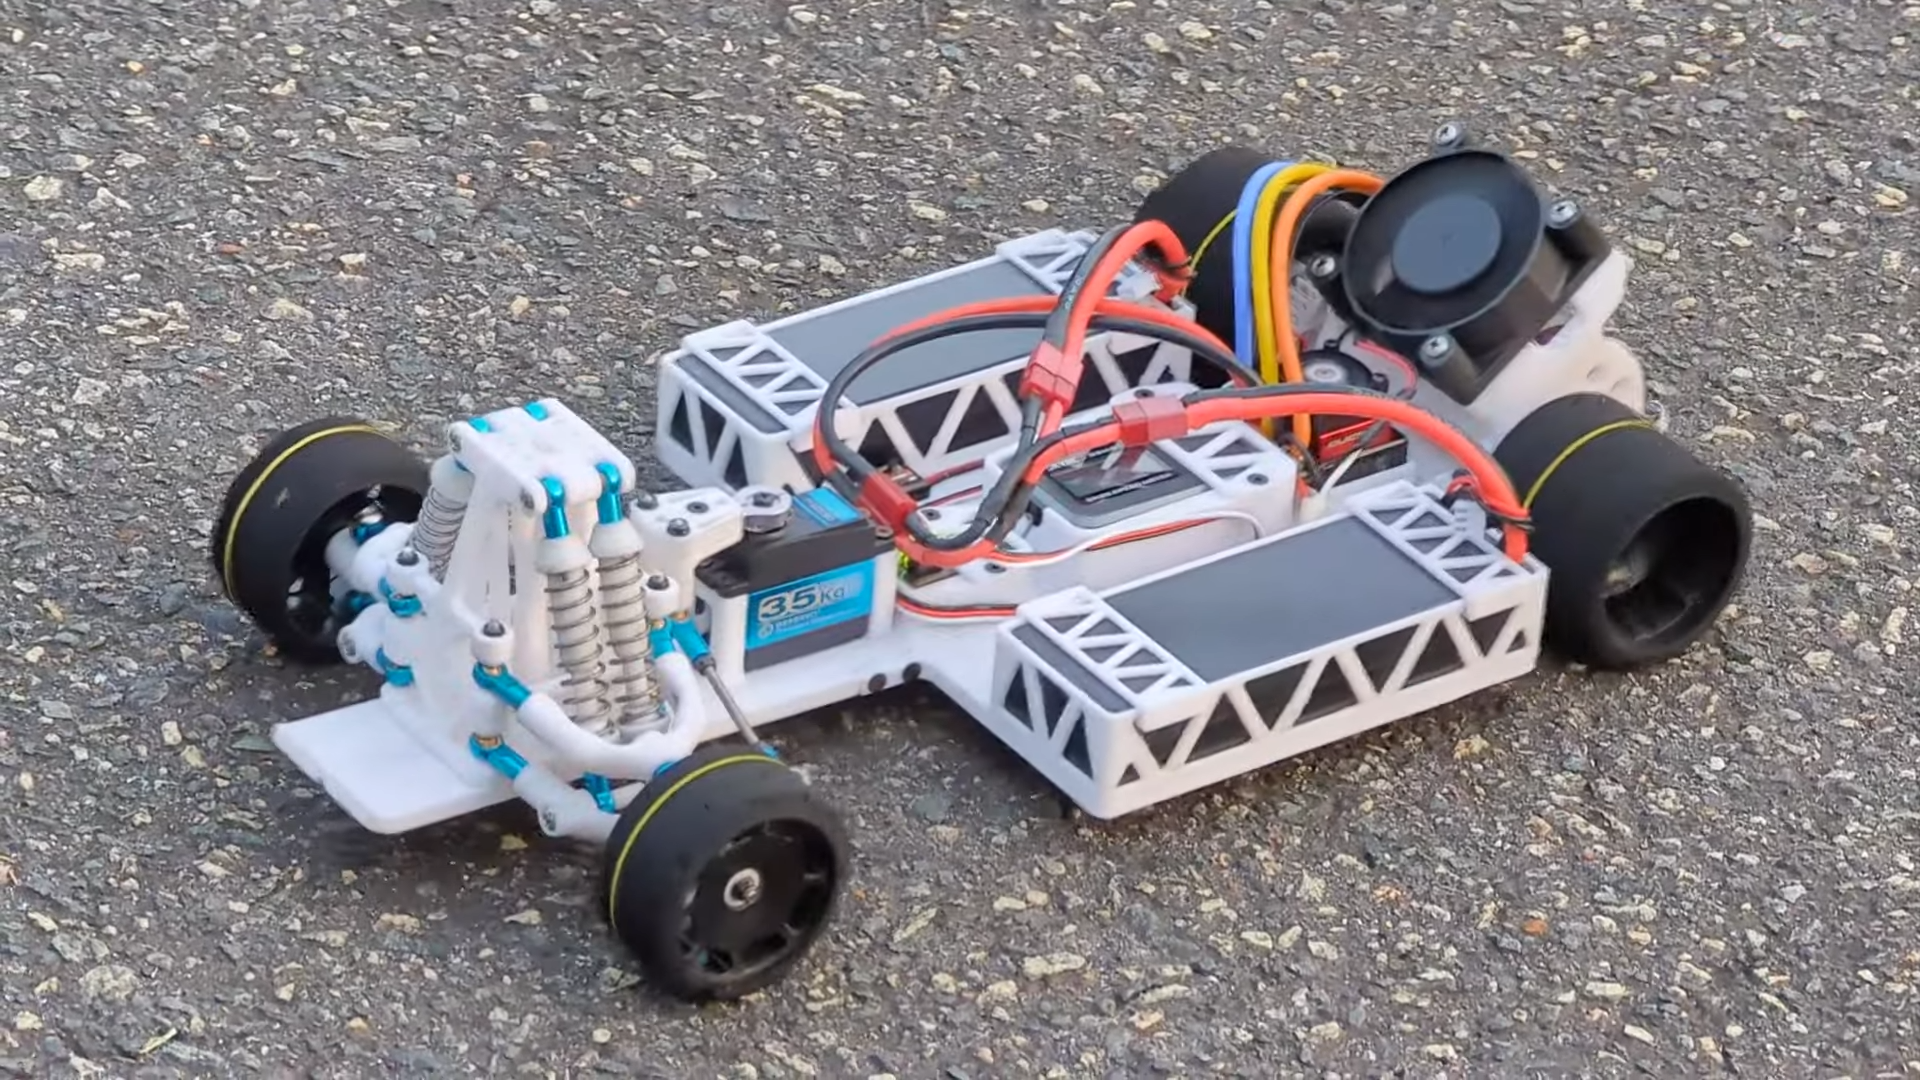 3D Printed RC Car Is Geared For Speed